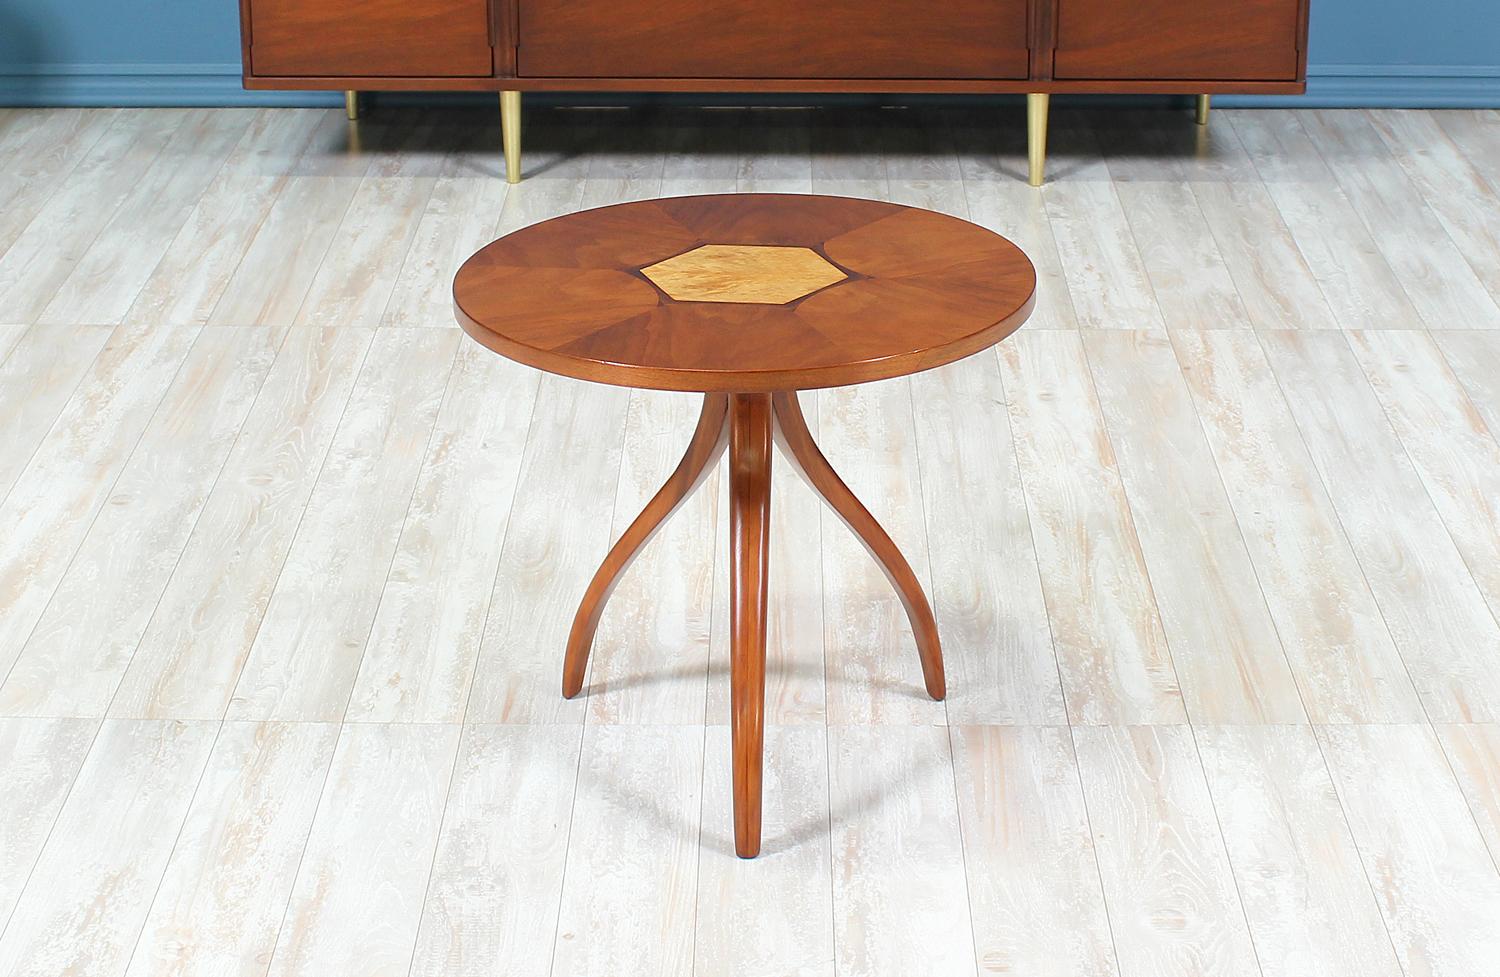 Unique side table manufactured by Drexel for their “Composite” series in the United States circa 1960’s. Beautifully crafted in walnut wood, this side table features sculptural tripod legs that support the round table top which displays a variety of